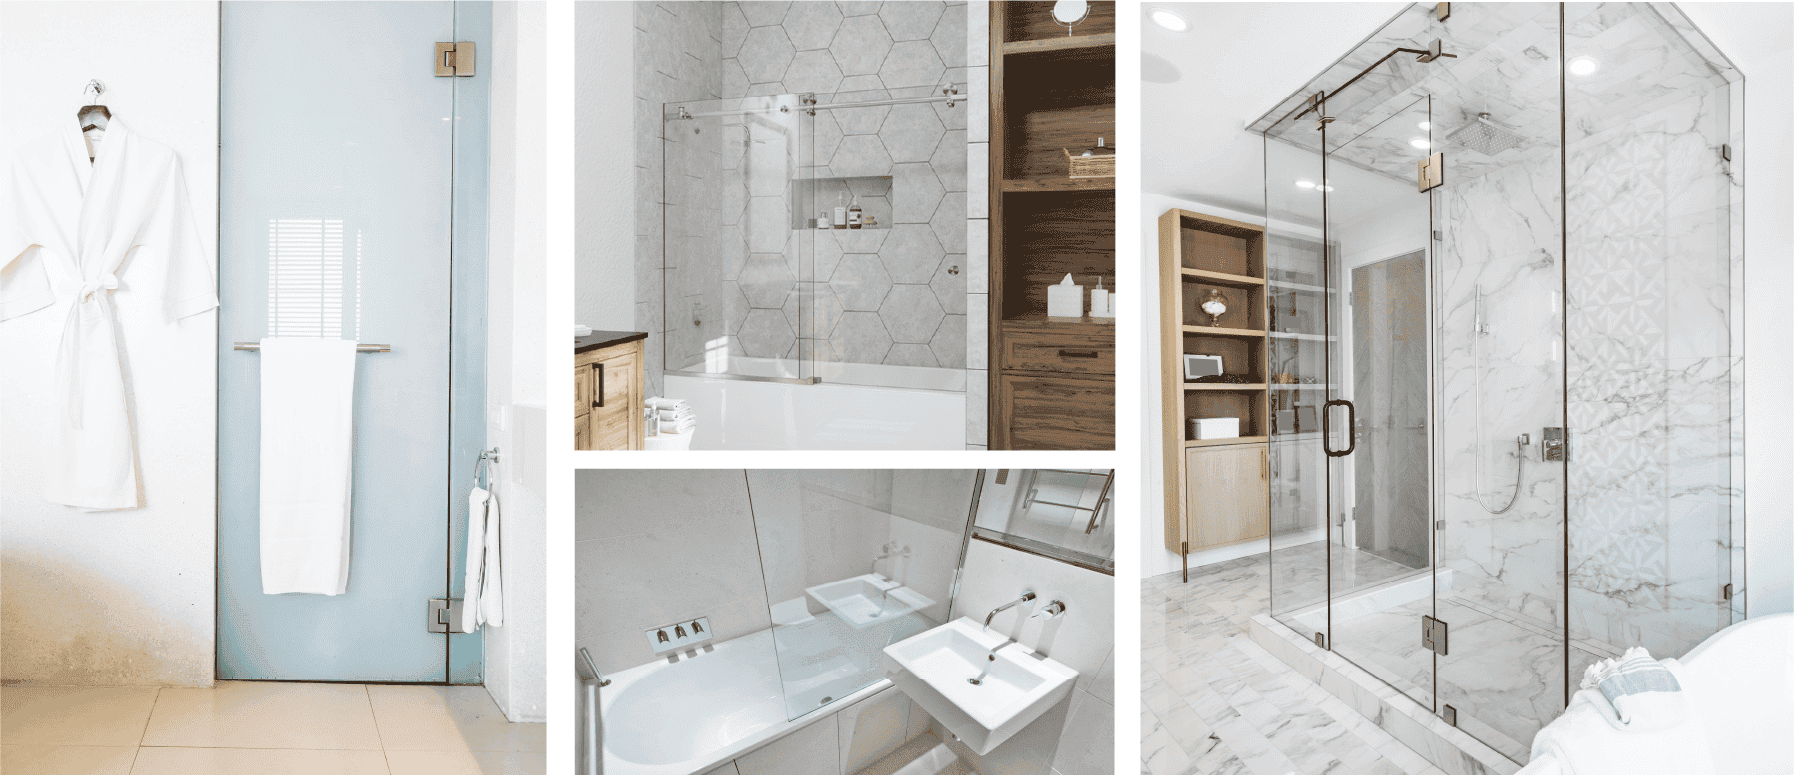 A collage showcasing diverse bathroom designs and features, offering a visual exploration of various styles and elements. 